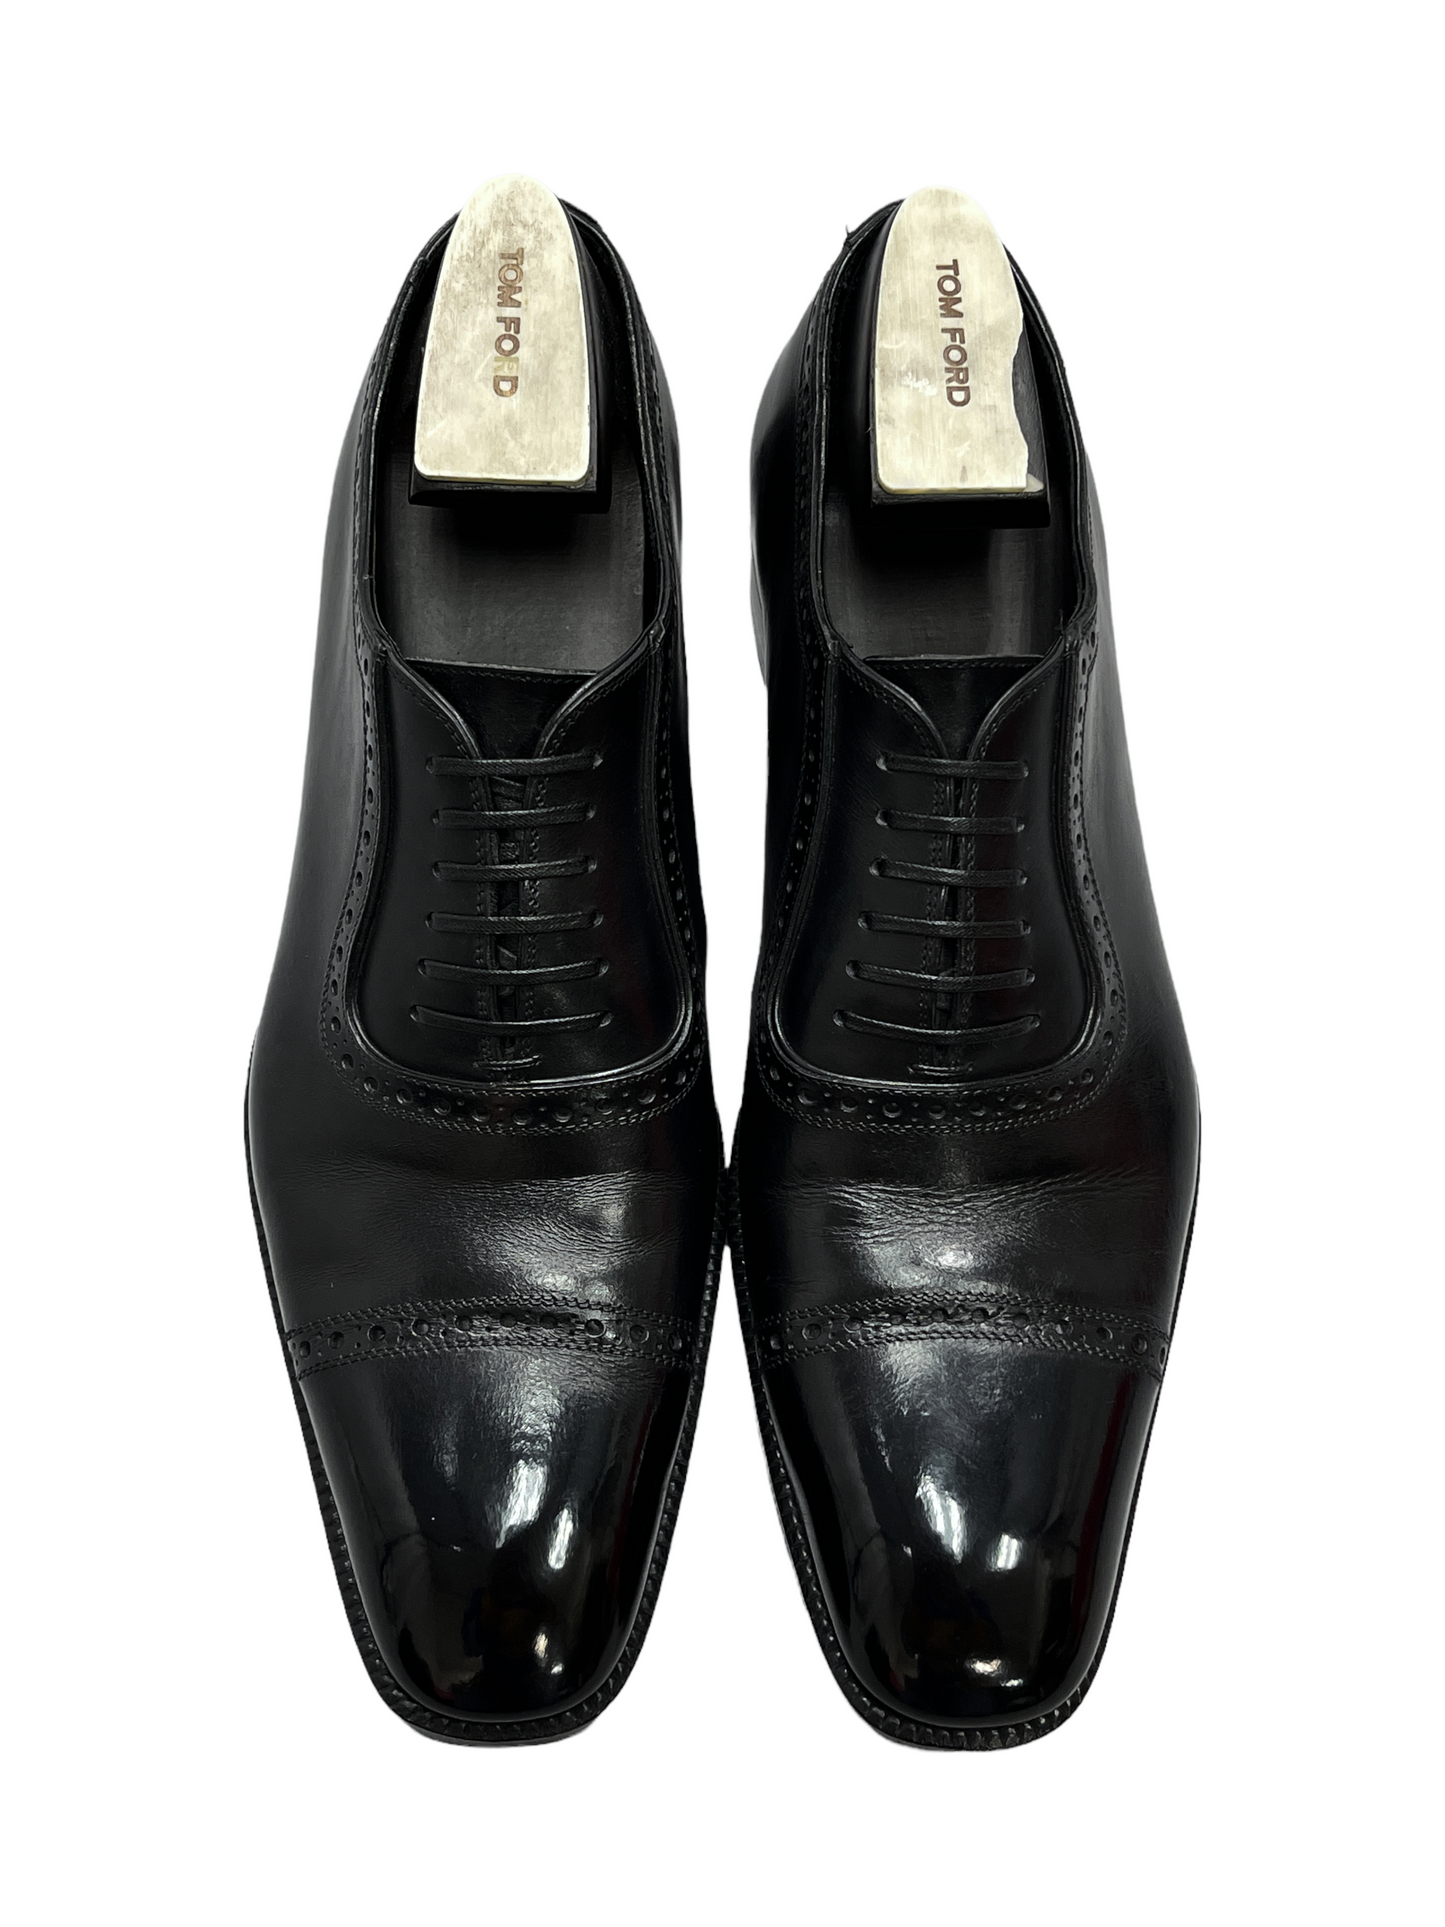 Tom Ford Black Leather Oxford Dress Shoe 8.5 D US — Genuine Design luxury consignment Calgary, Canada New & pre-owned clothing, shoes, accessories.